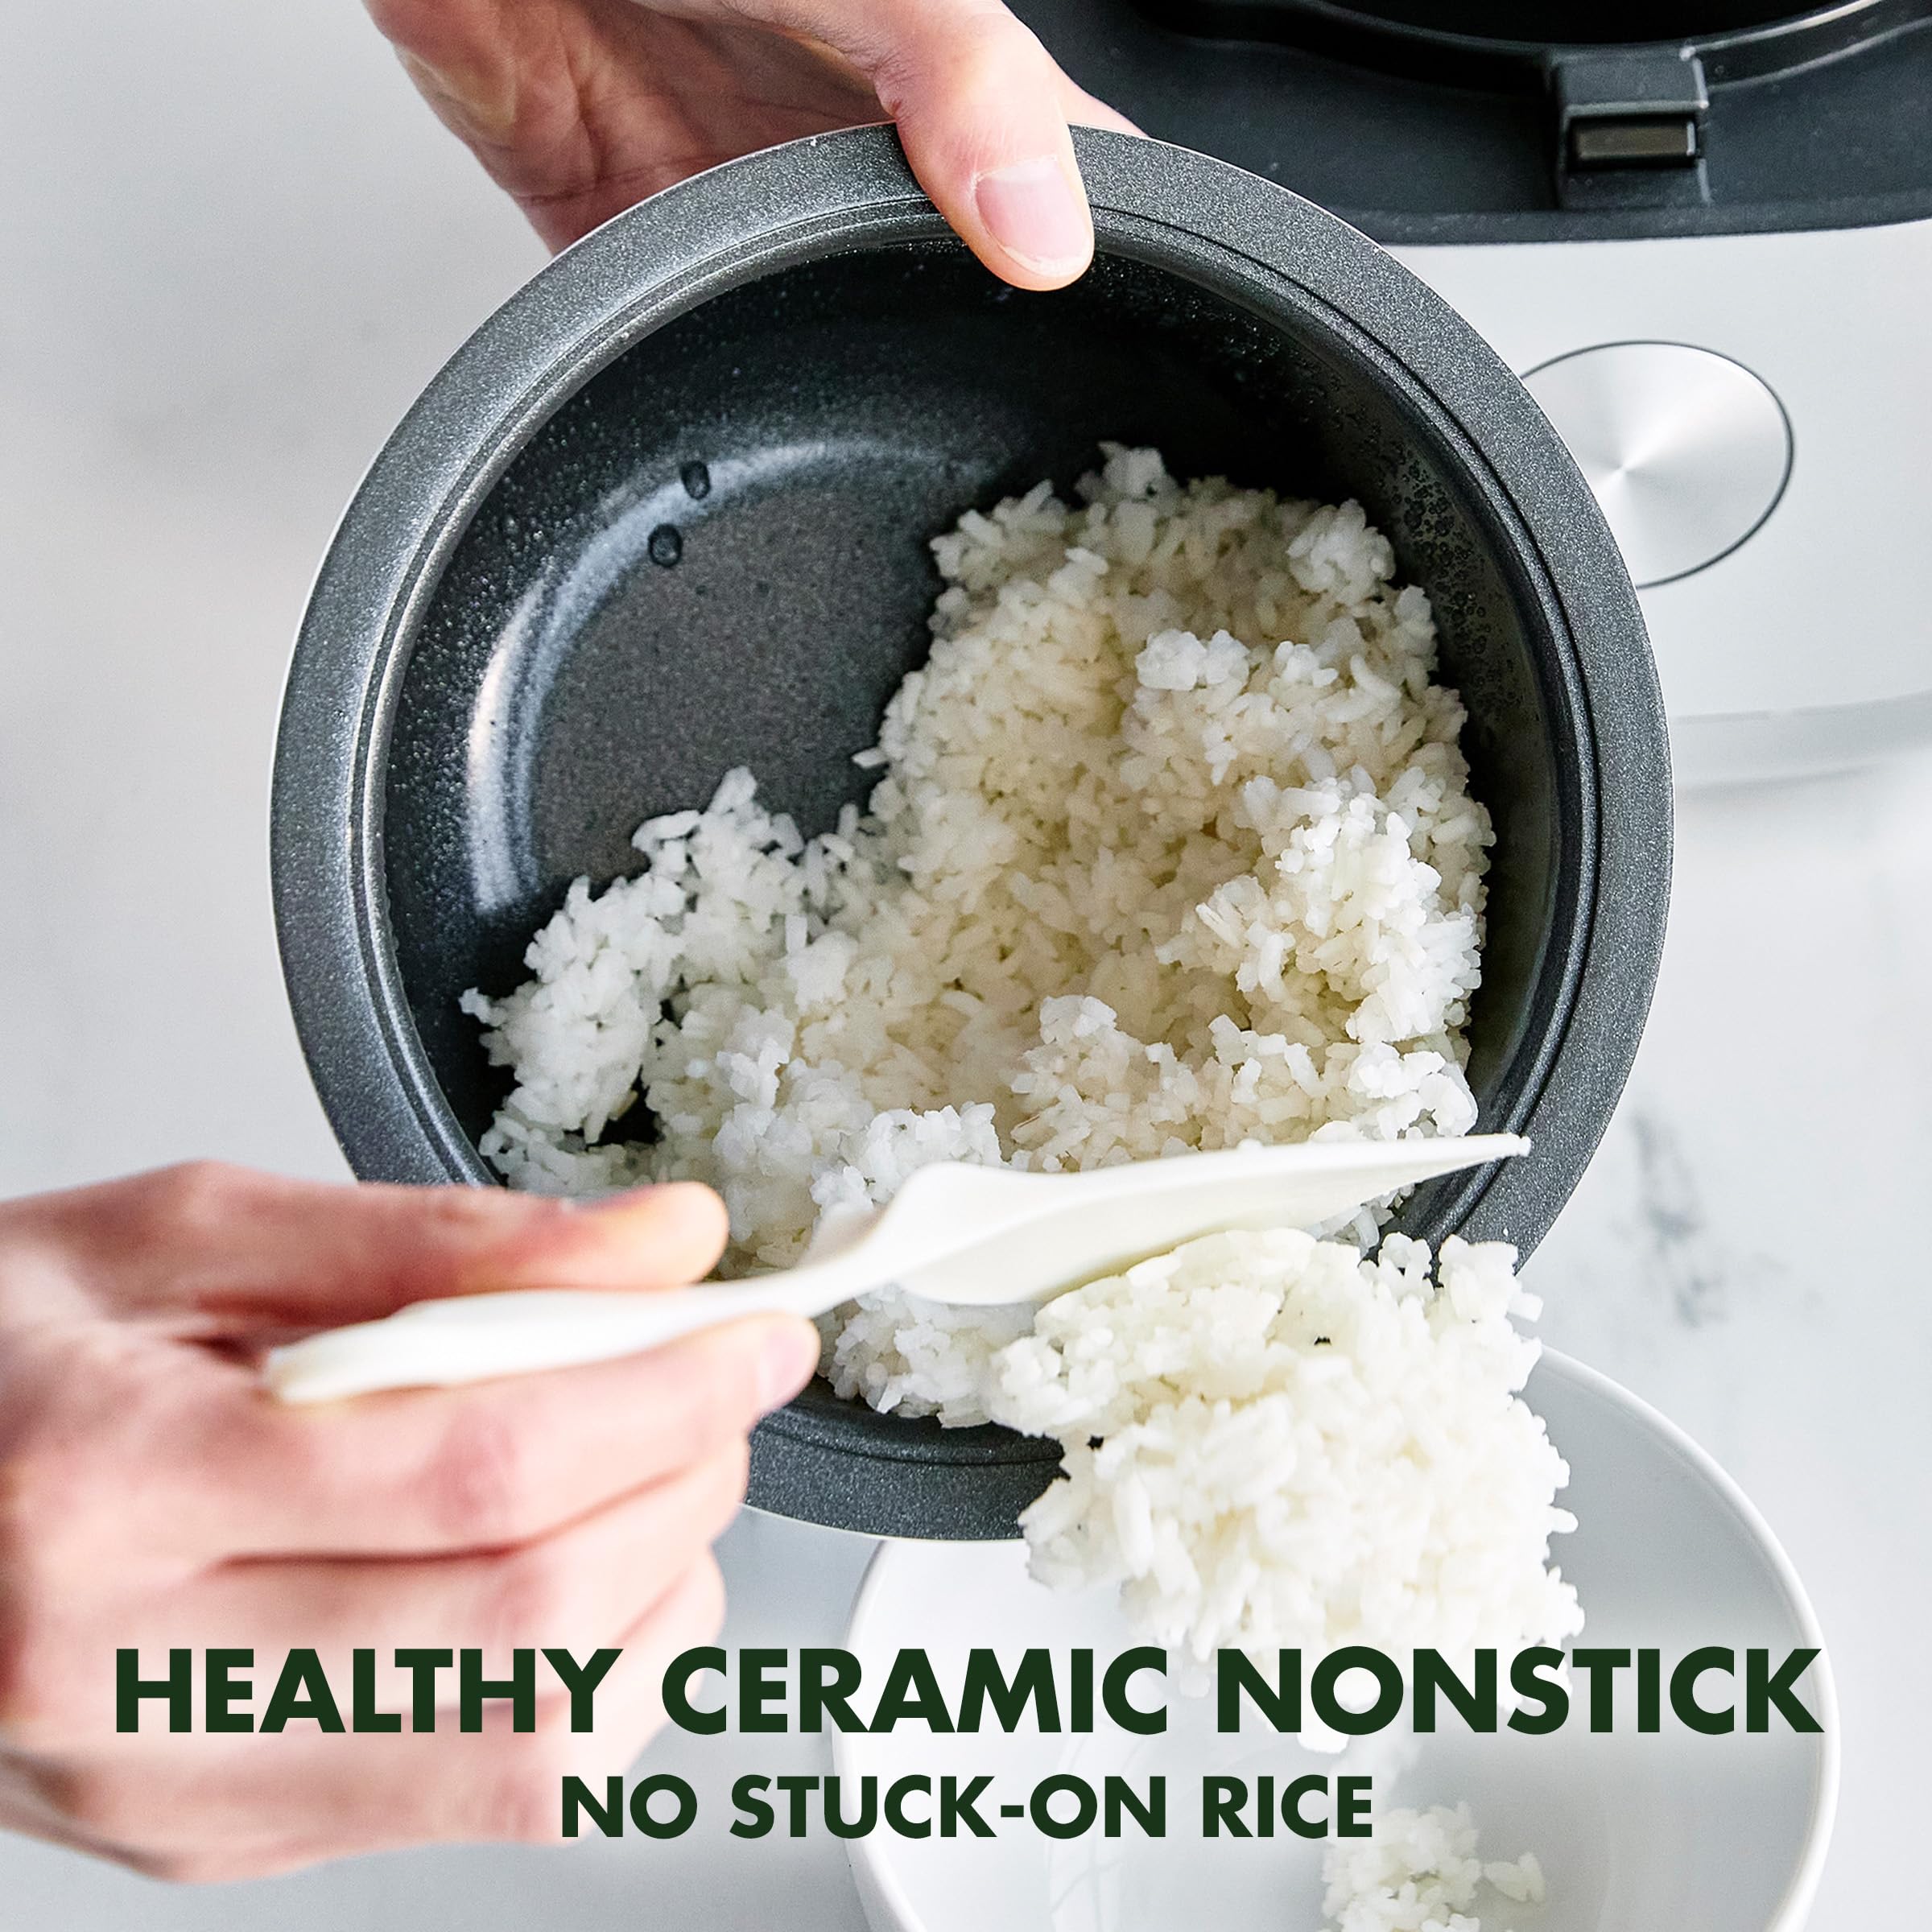 GreenPan Healthy Ceramic Nonstick Rice Quinoa Steel Cut Oats & Grains Cooker,Easy Meal Presets,4 Cups Uncooked (8 Cooked),Cool Touch,Compact,Warms, Steam,Removeable Bowl,Spatula Ladle&Cup, White